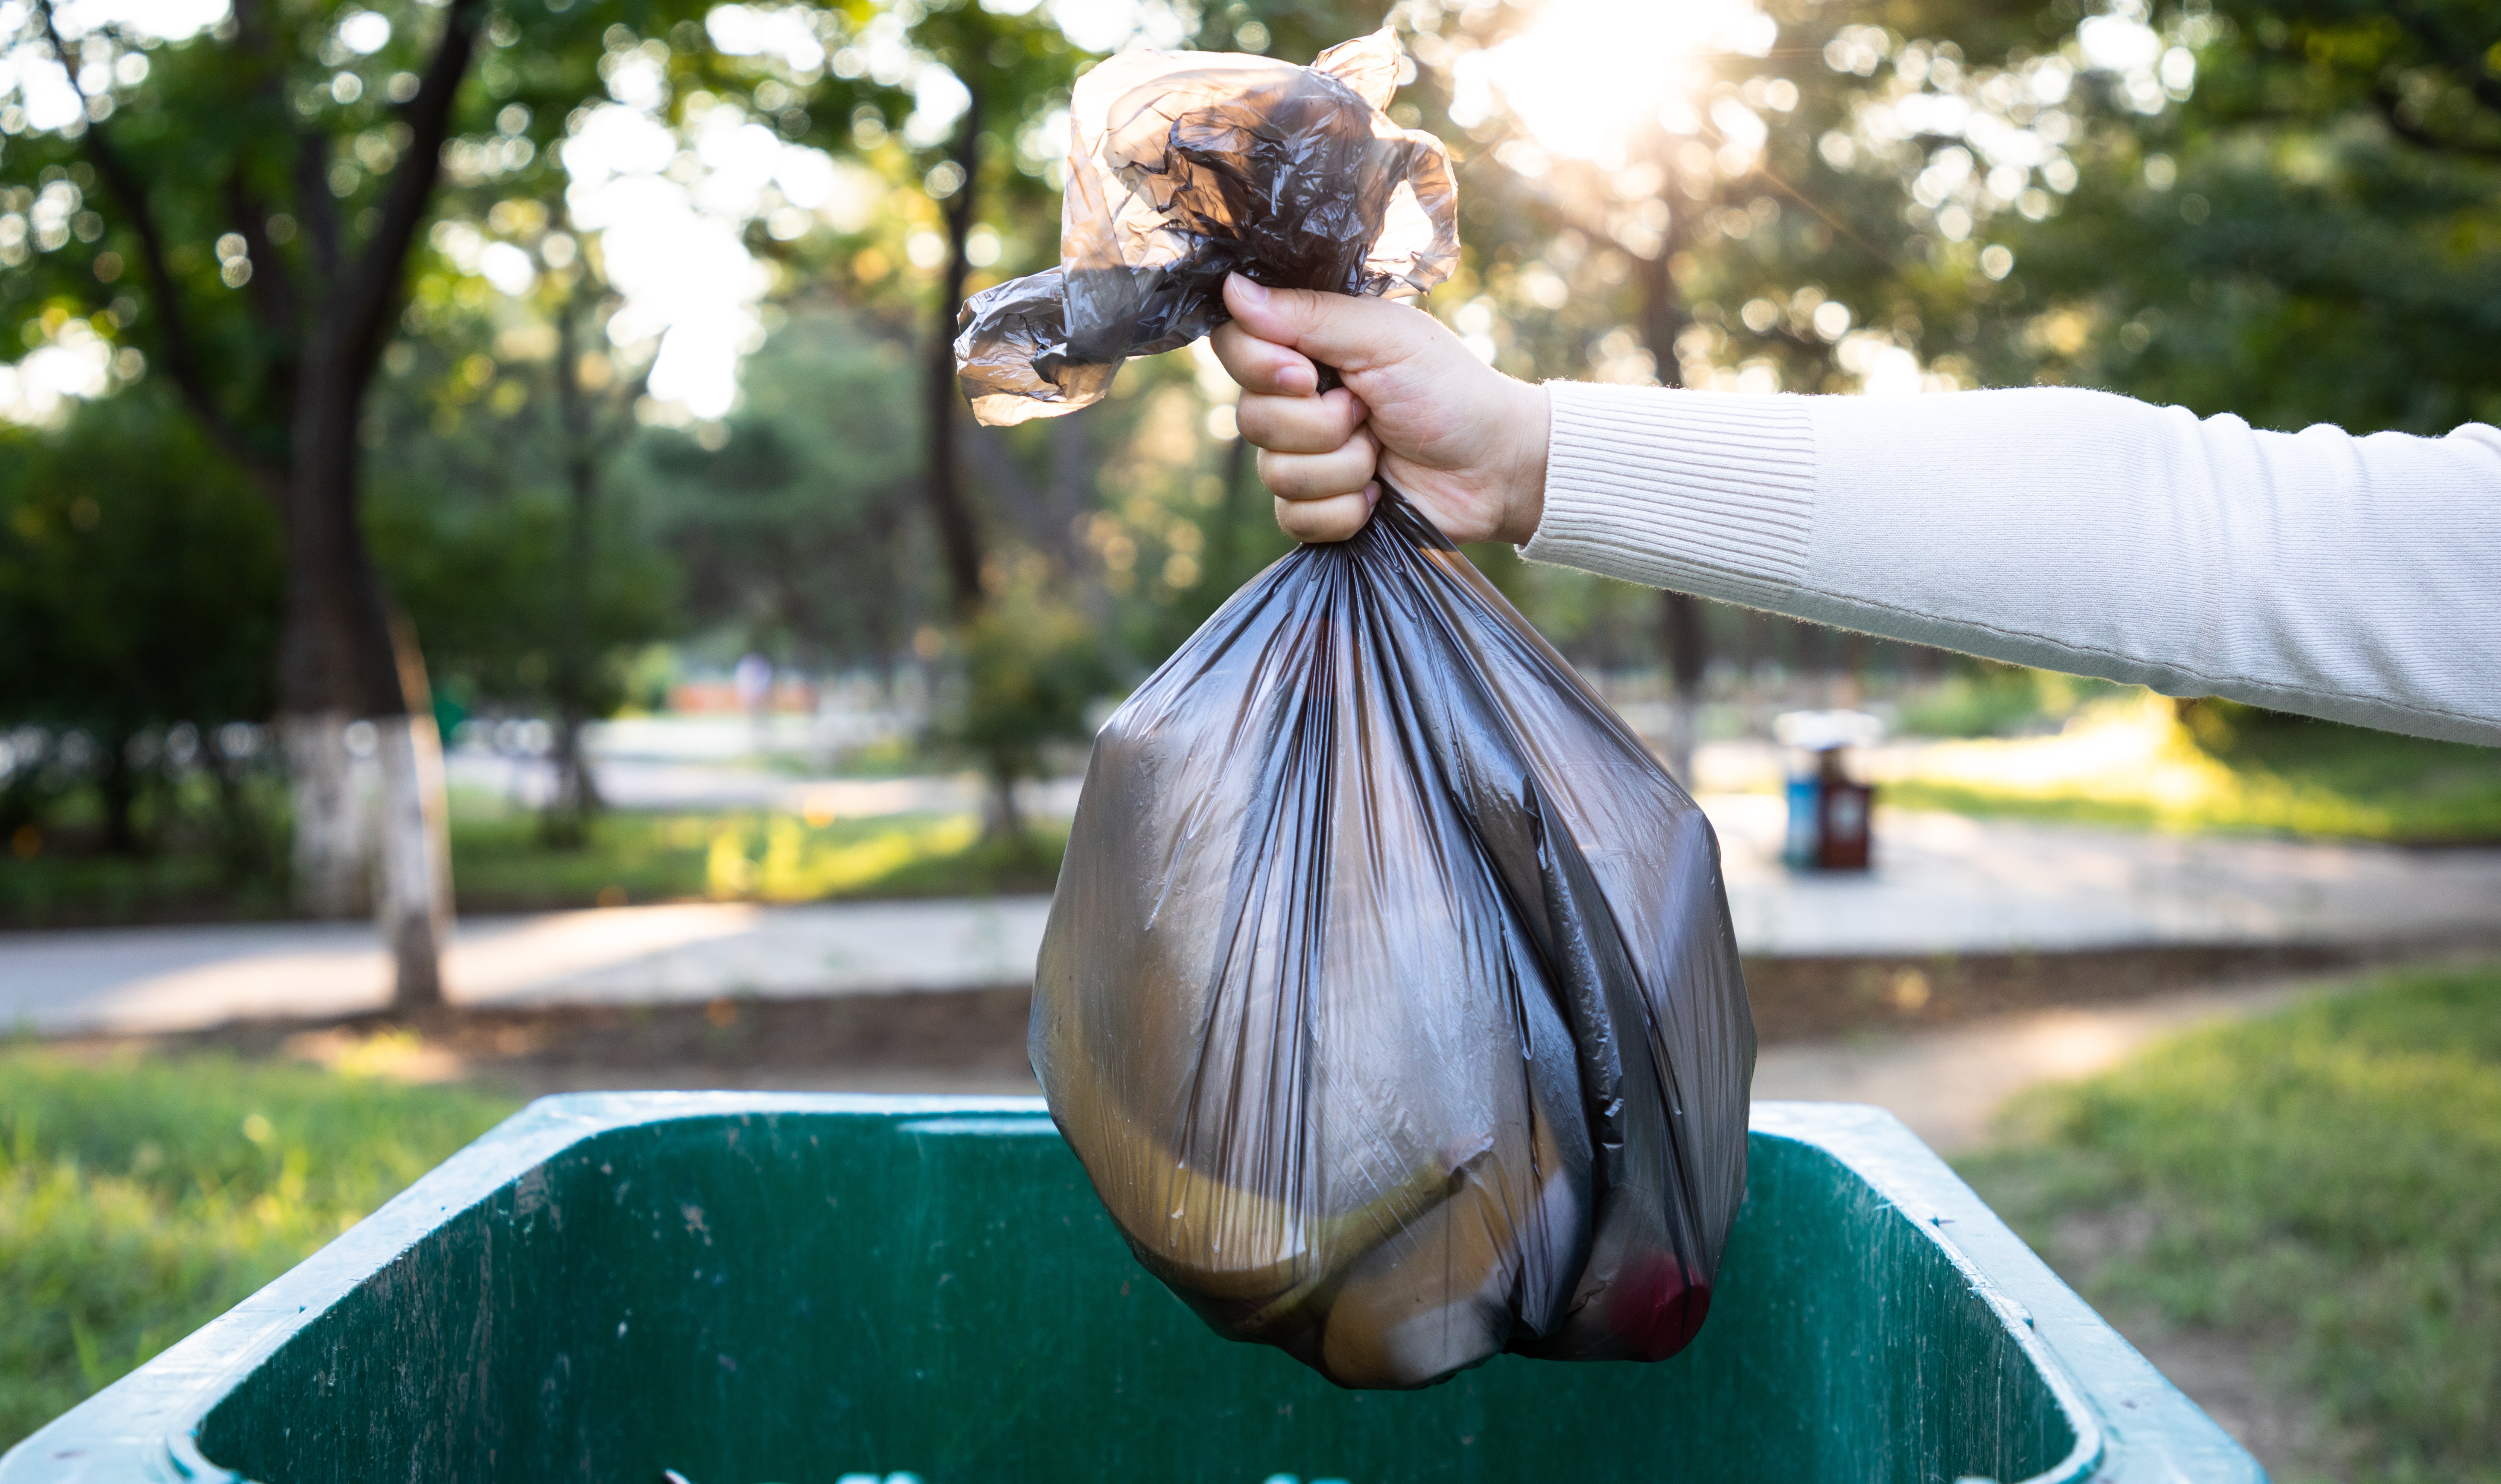 A garbage bag full of food waste hovers over a garbage bin